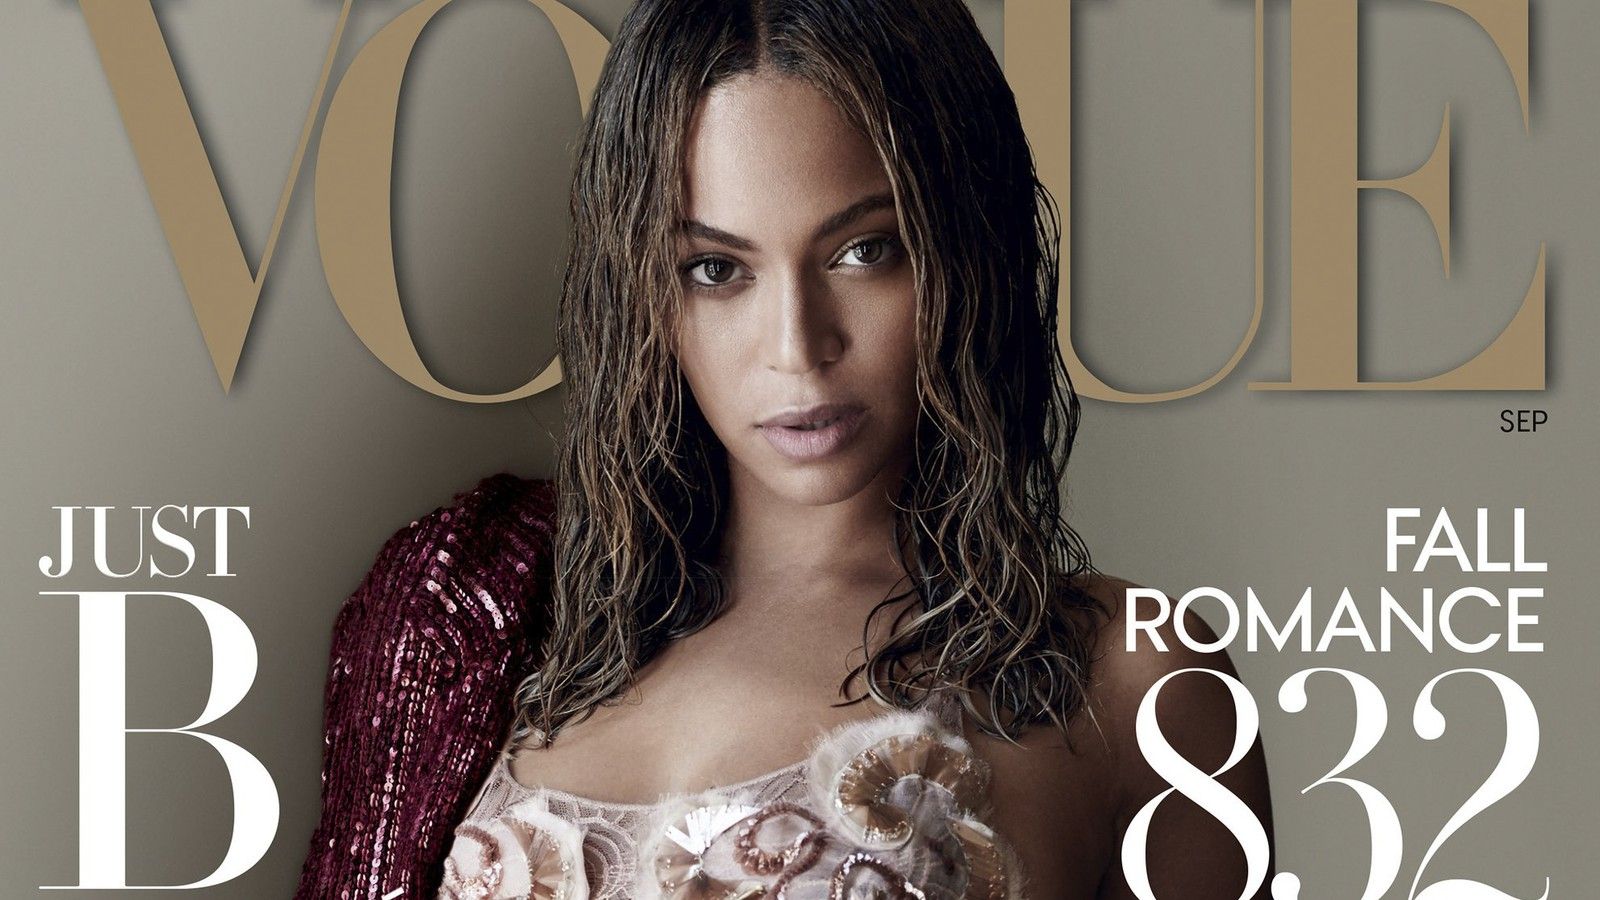 Beyoncé graces the cover of Vogue's September issue. - Beyonce